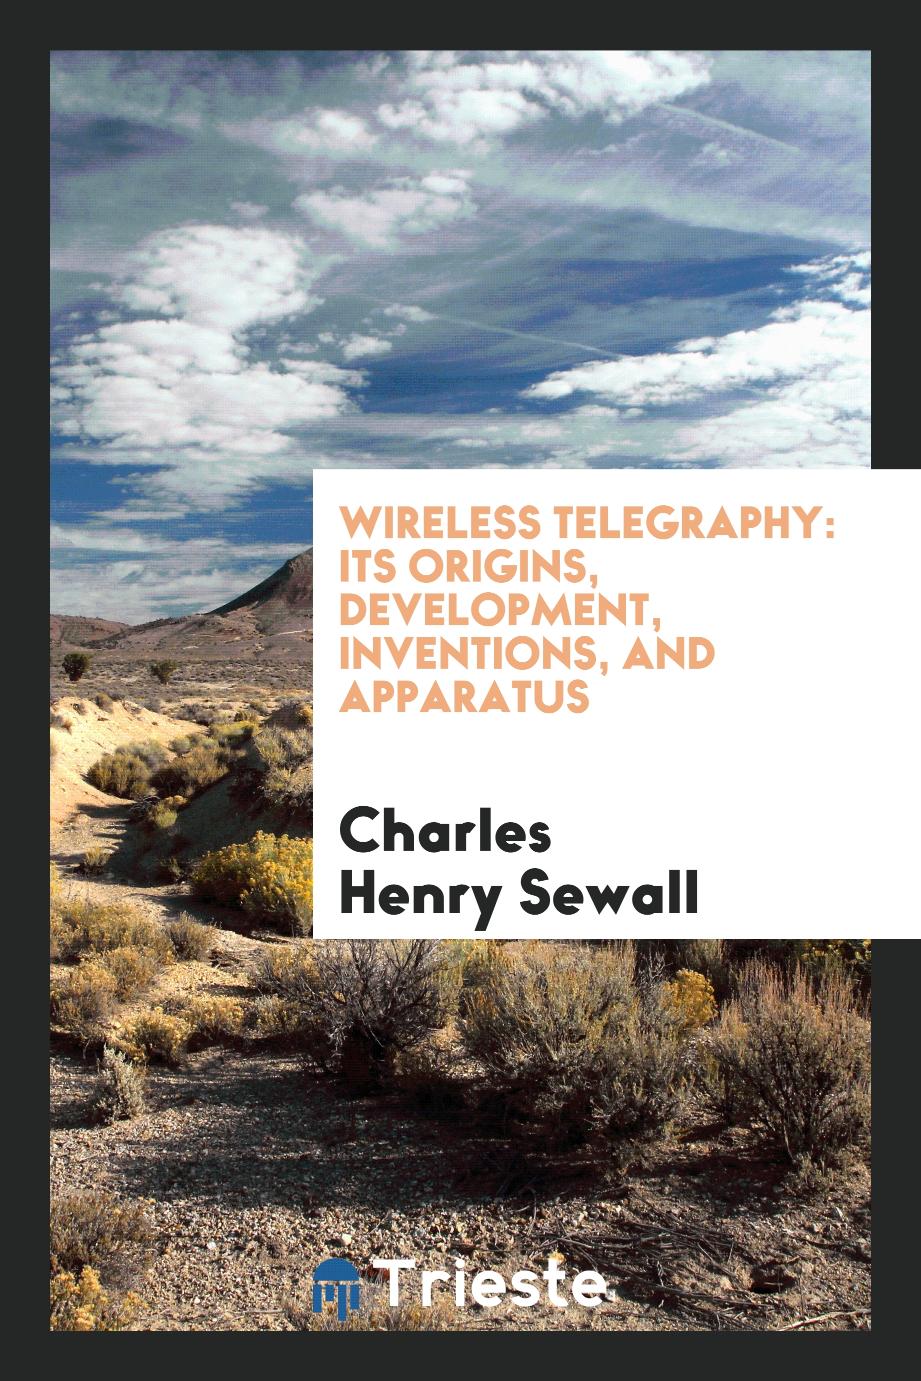 Wireless Telegraphy: Its Origins, Development, Inventions, and Apparatus